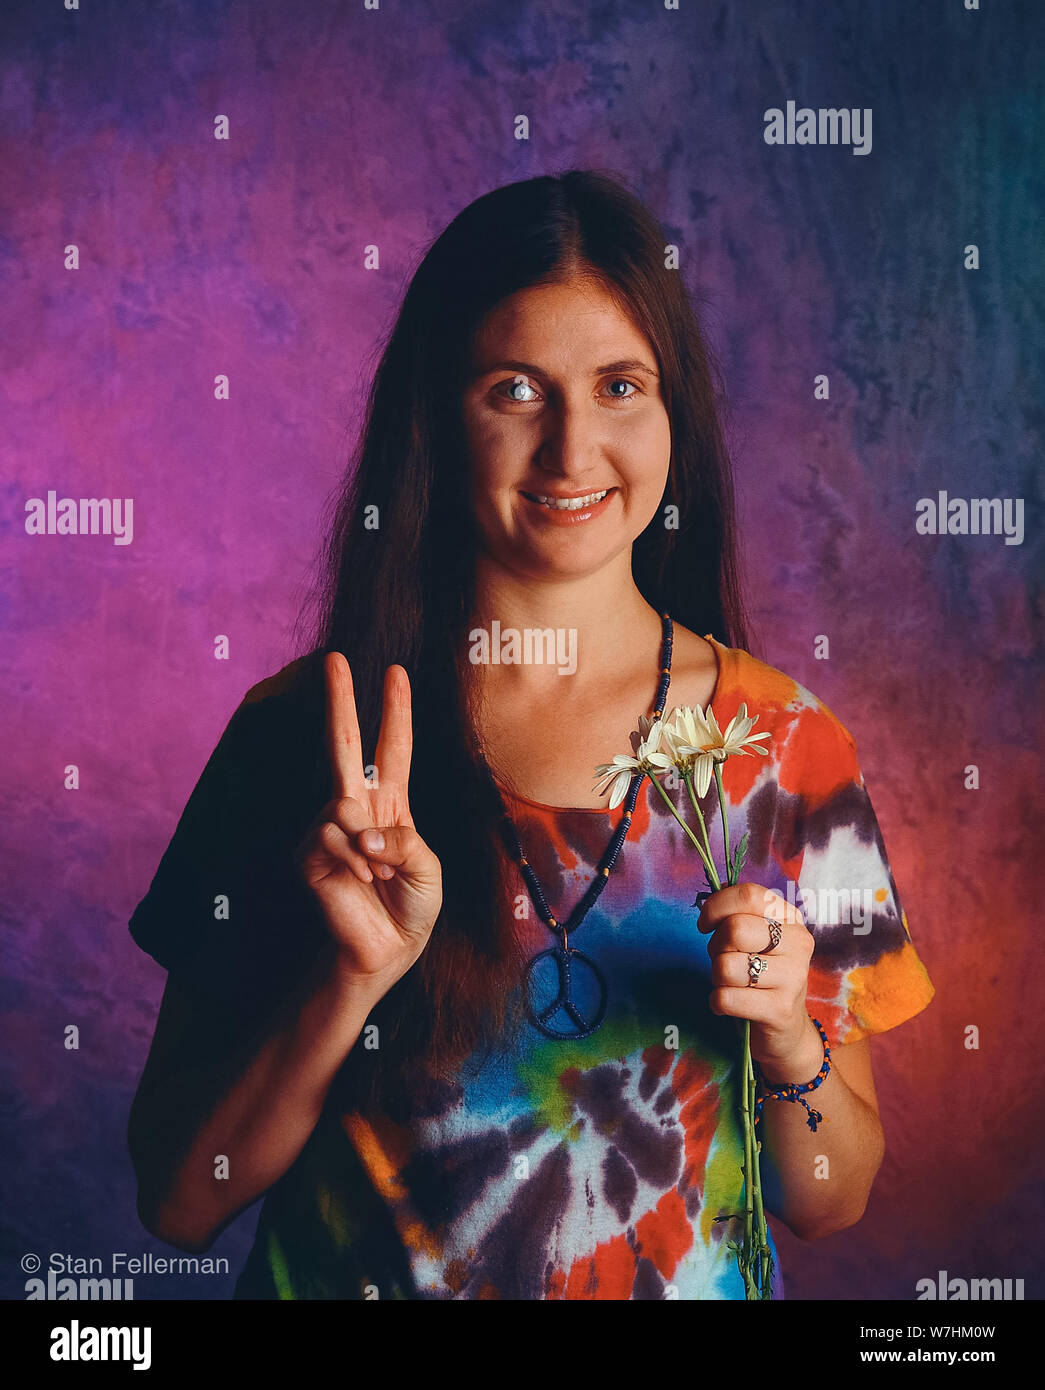 Girl in tie dye shirt holding up peace sign Stock Photo